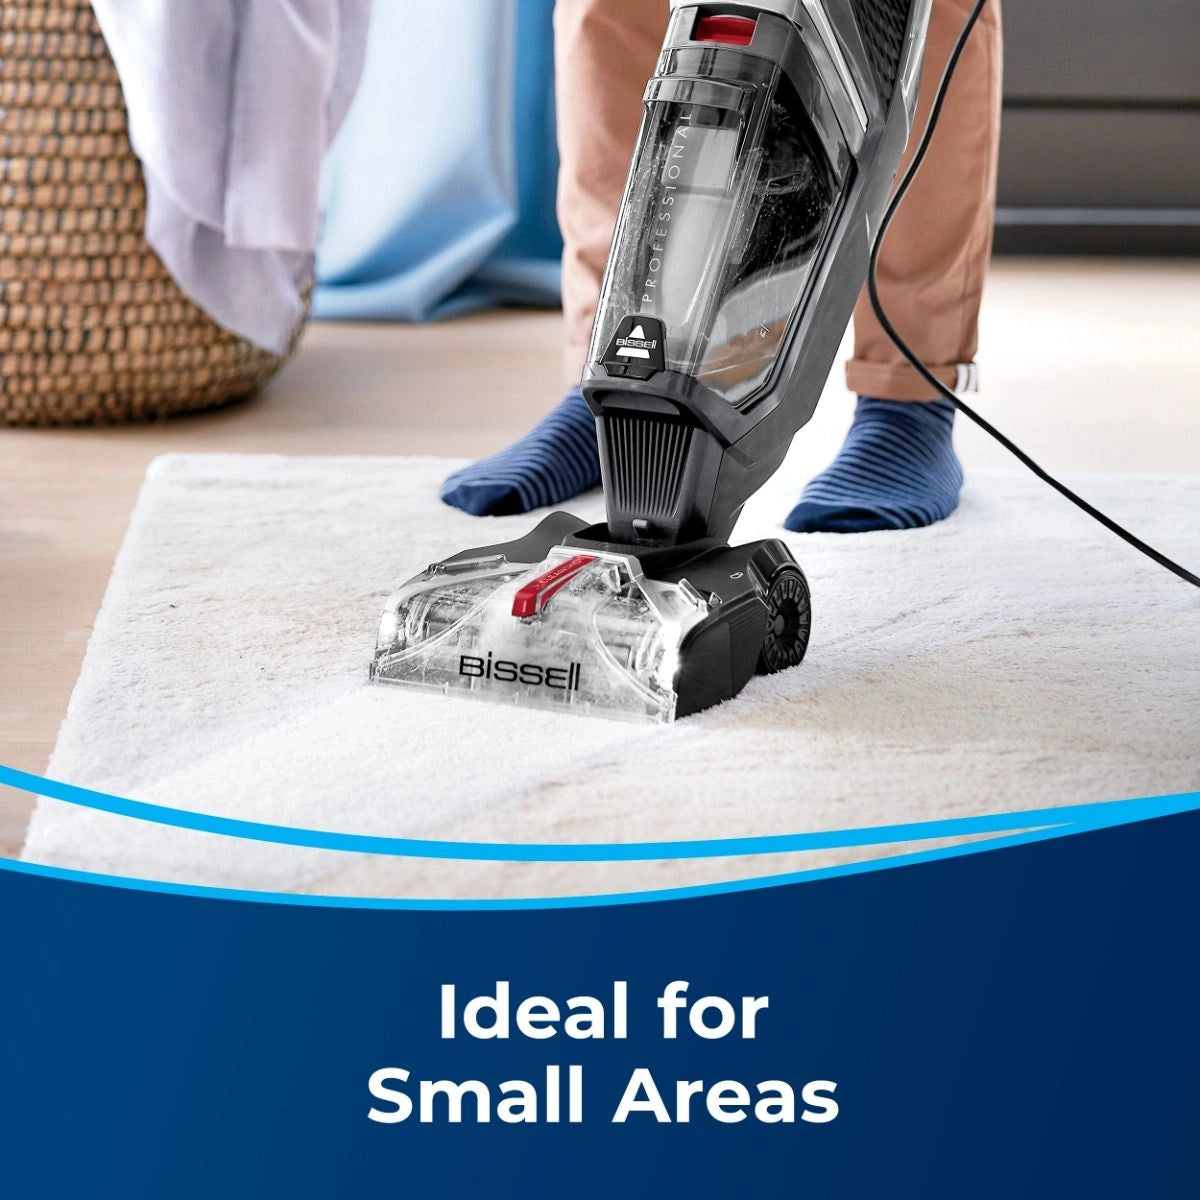 BISSELL HYDROWAVE Ultralight Carpet Washer 385W